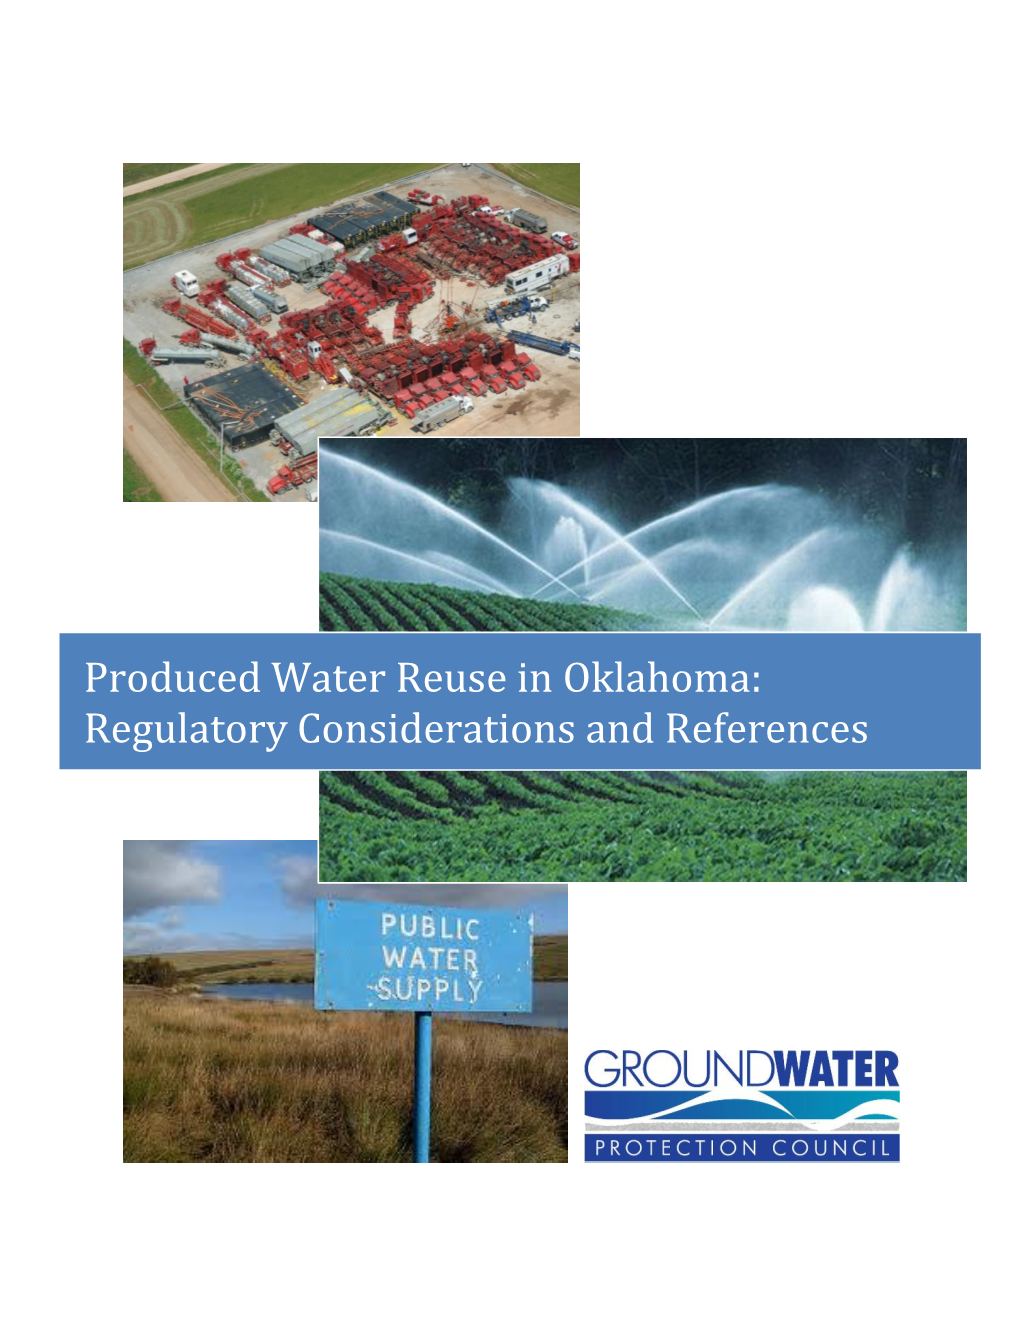 Produced Water Reuse in Oklahoma: Regulatory Considerations and References Ground Water Protection Council December 2, 2015